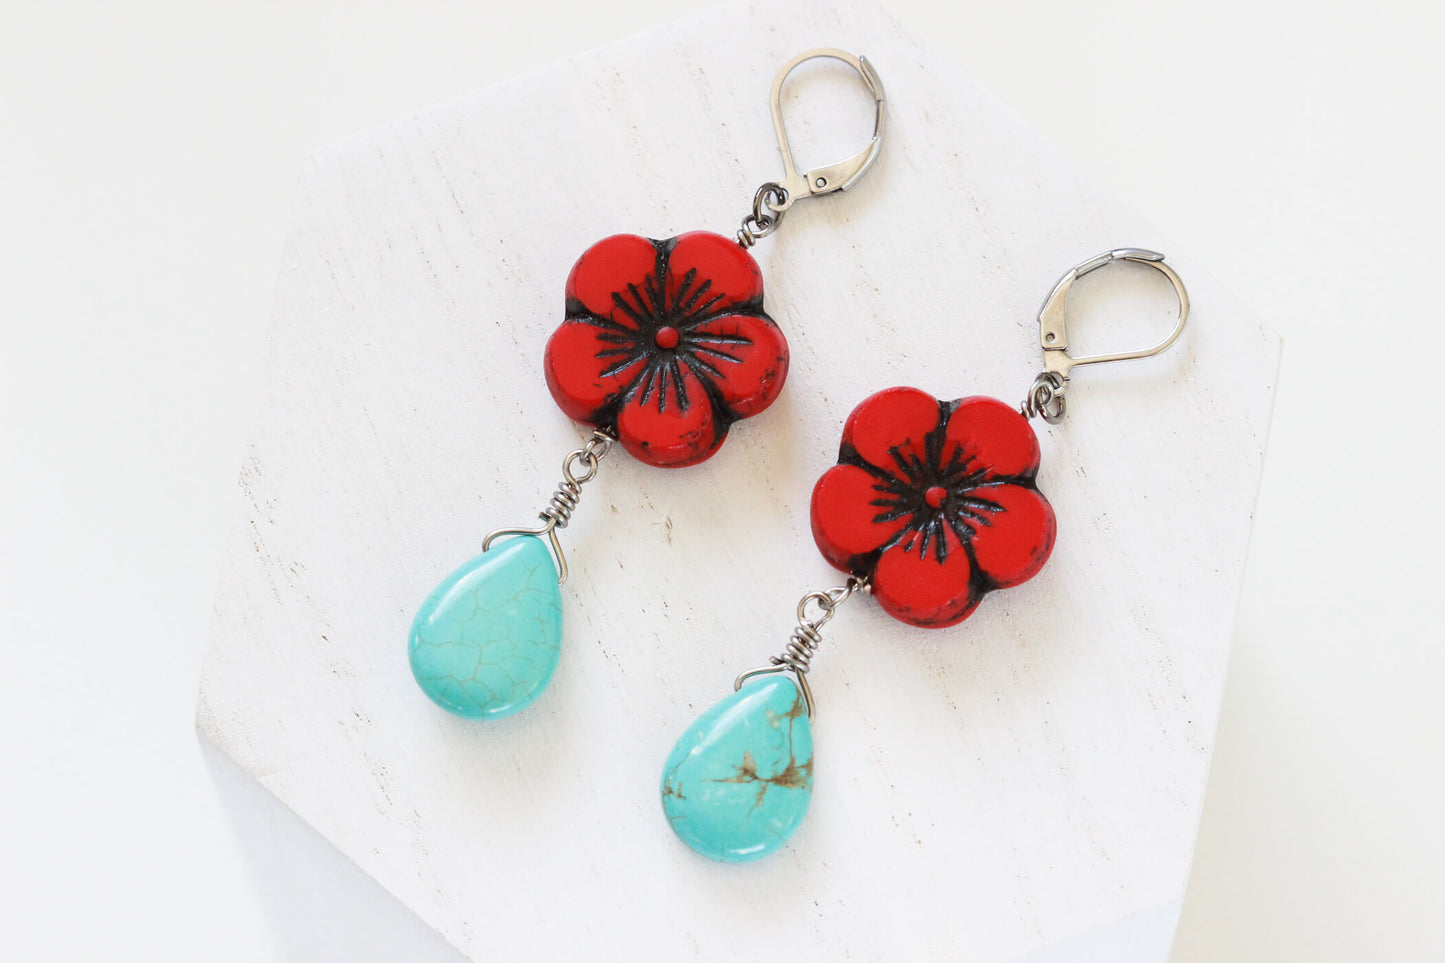 Red Flower Turquoise Drop Earrings - Simple Drop Earrings by Kaleidoscopes And Polka Dots